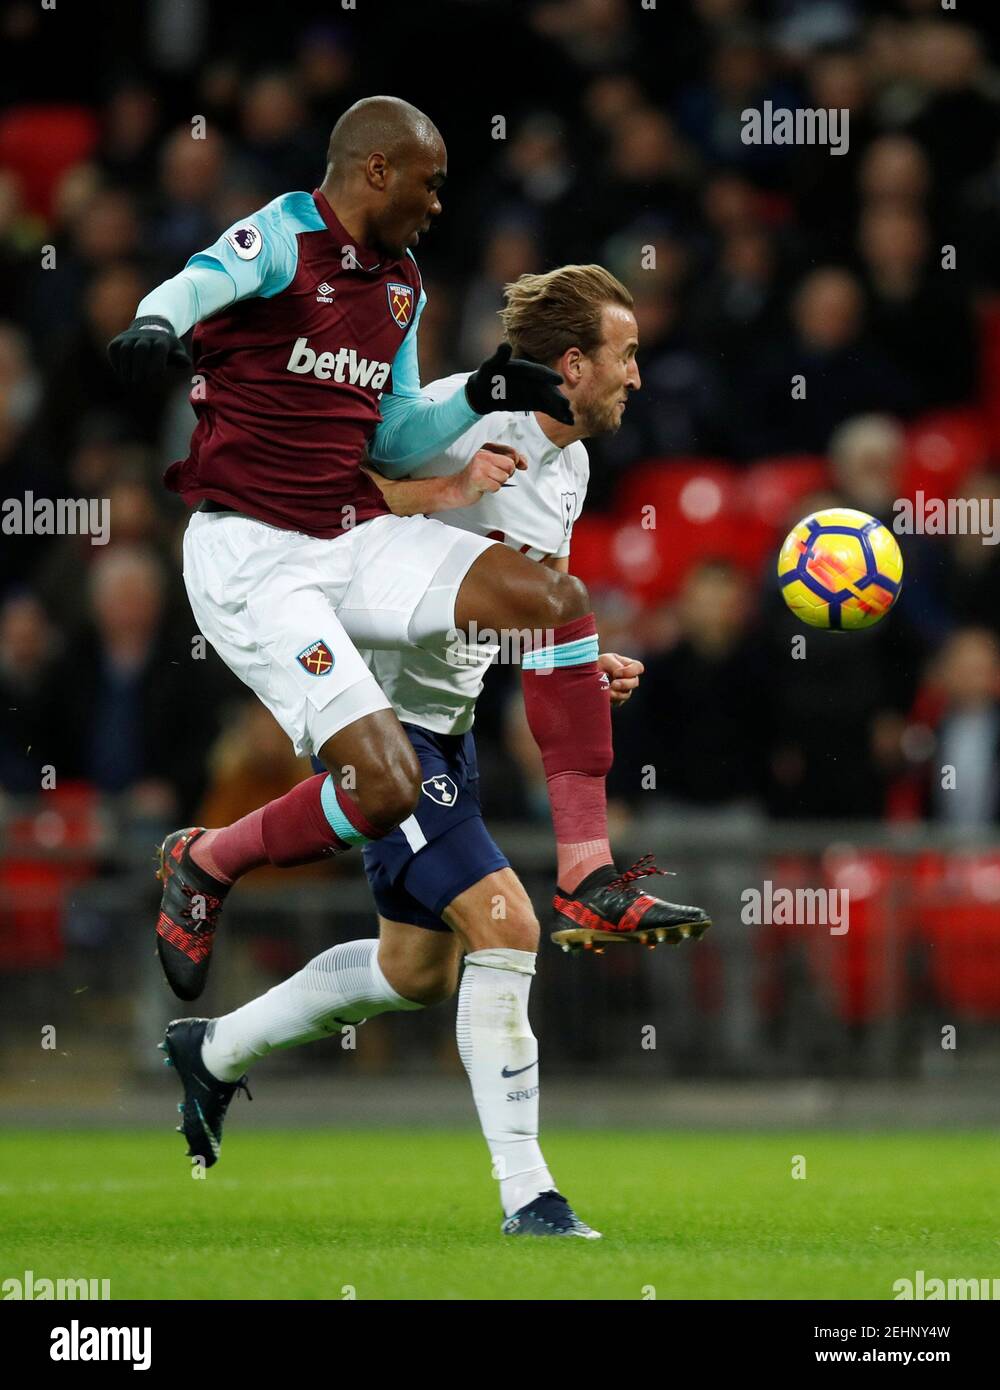 Soccer Football - Premier League - Tottenham Hotspur vs West Ham United - Wembley Stadium, London, Britain - January 4, 2018   Tottenham's Harry Kane in action with West Ham United's Angelo Ogbonna    REUTERS/Eddie Keogh    EDITORIAL USE ONLY. No use with unauthorized audio, video, data, fixture lists, club/league logos or 'live' services. Online in-match use limited to 75 images, no video emulation. No use in betting, games or single club/league/player publications.  Please contact your account representative for further details. Stock Photo